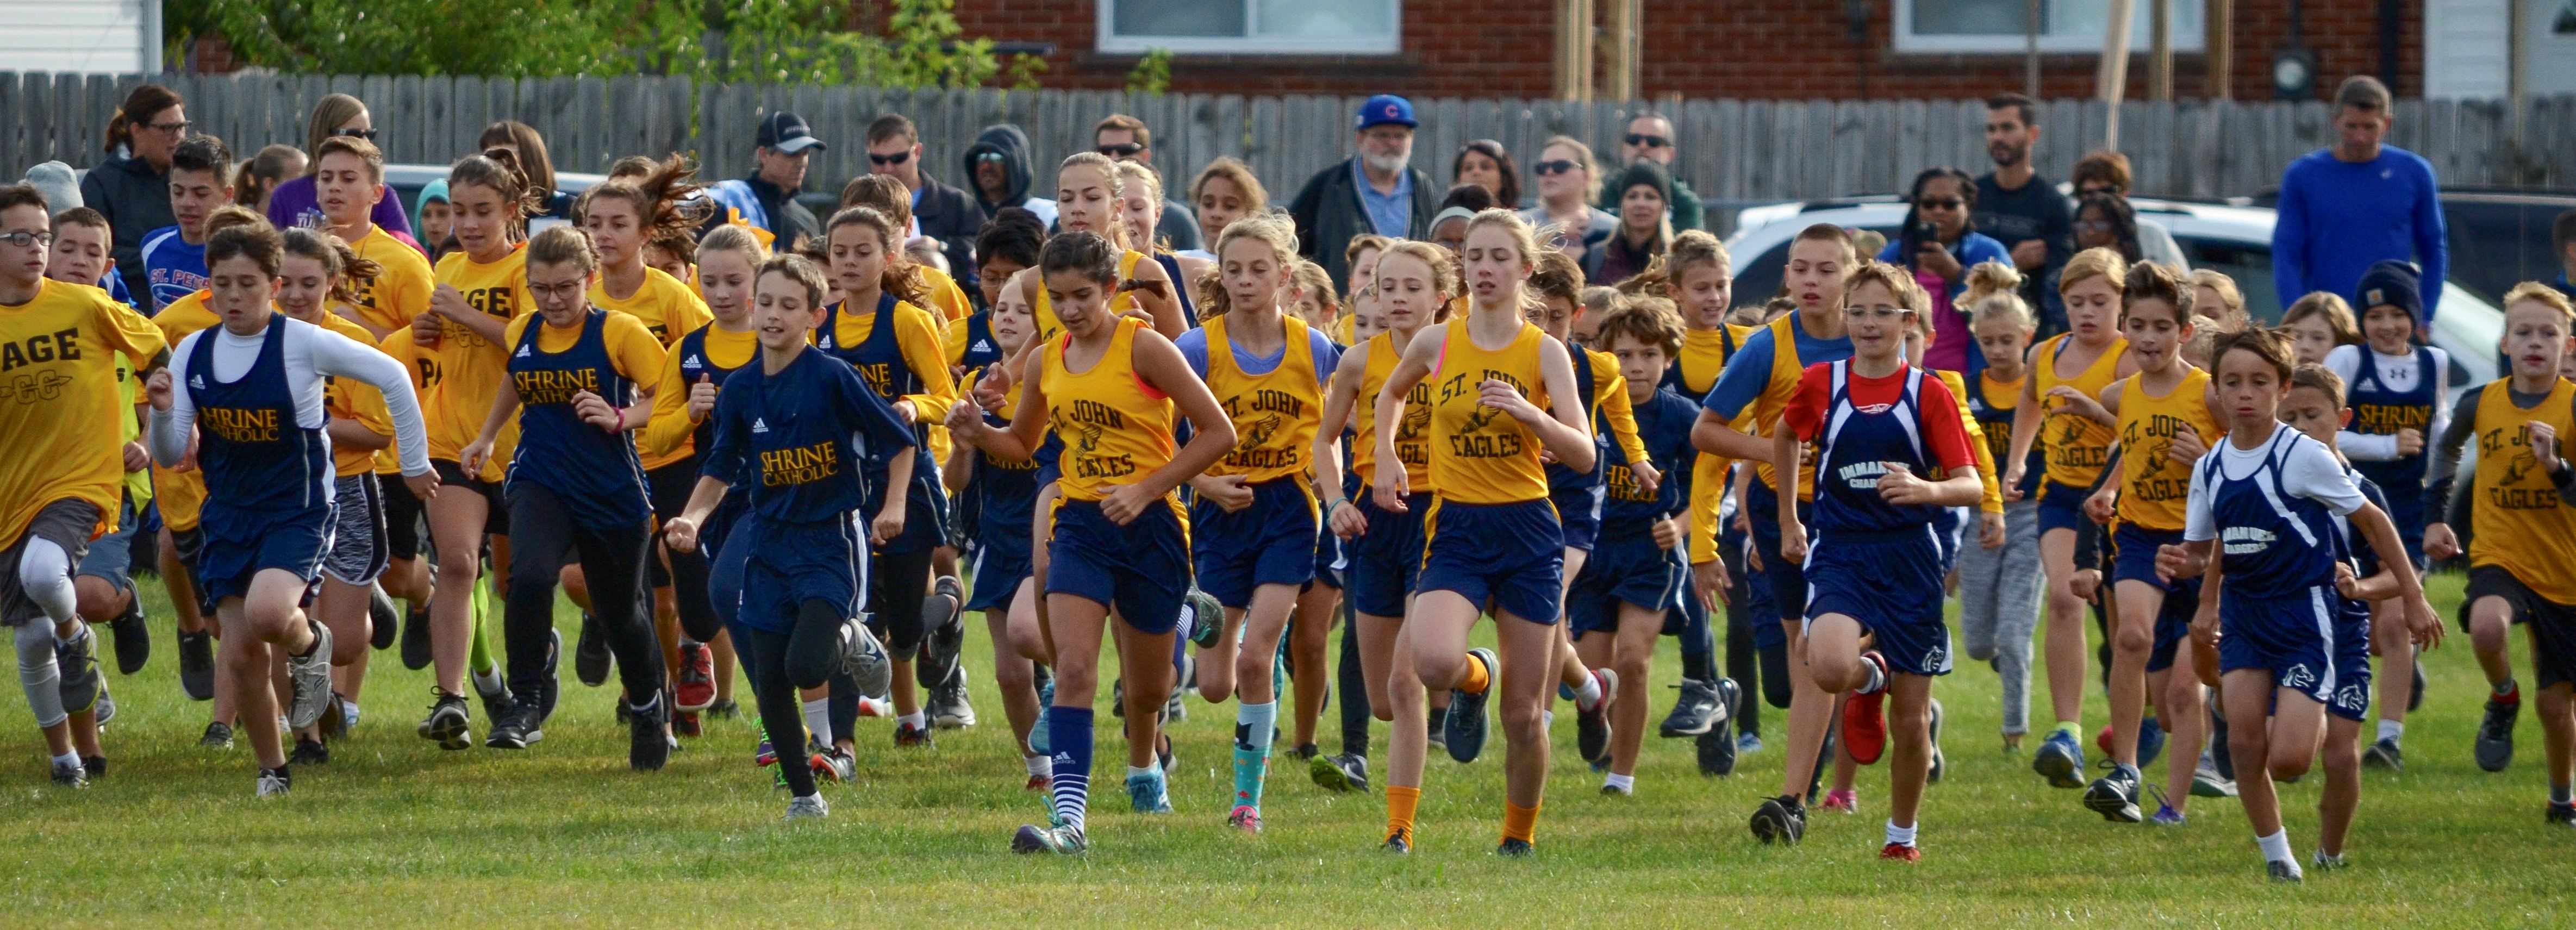 Cross Country Michigan District, LCMS